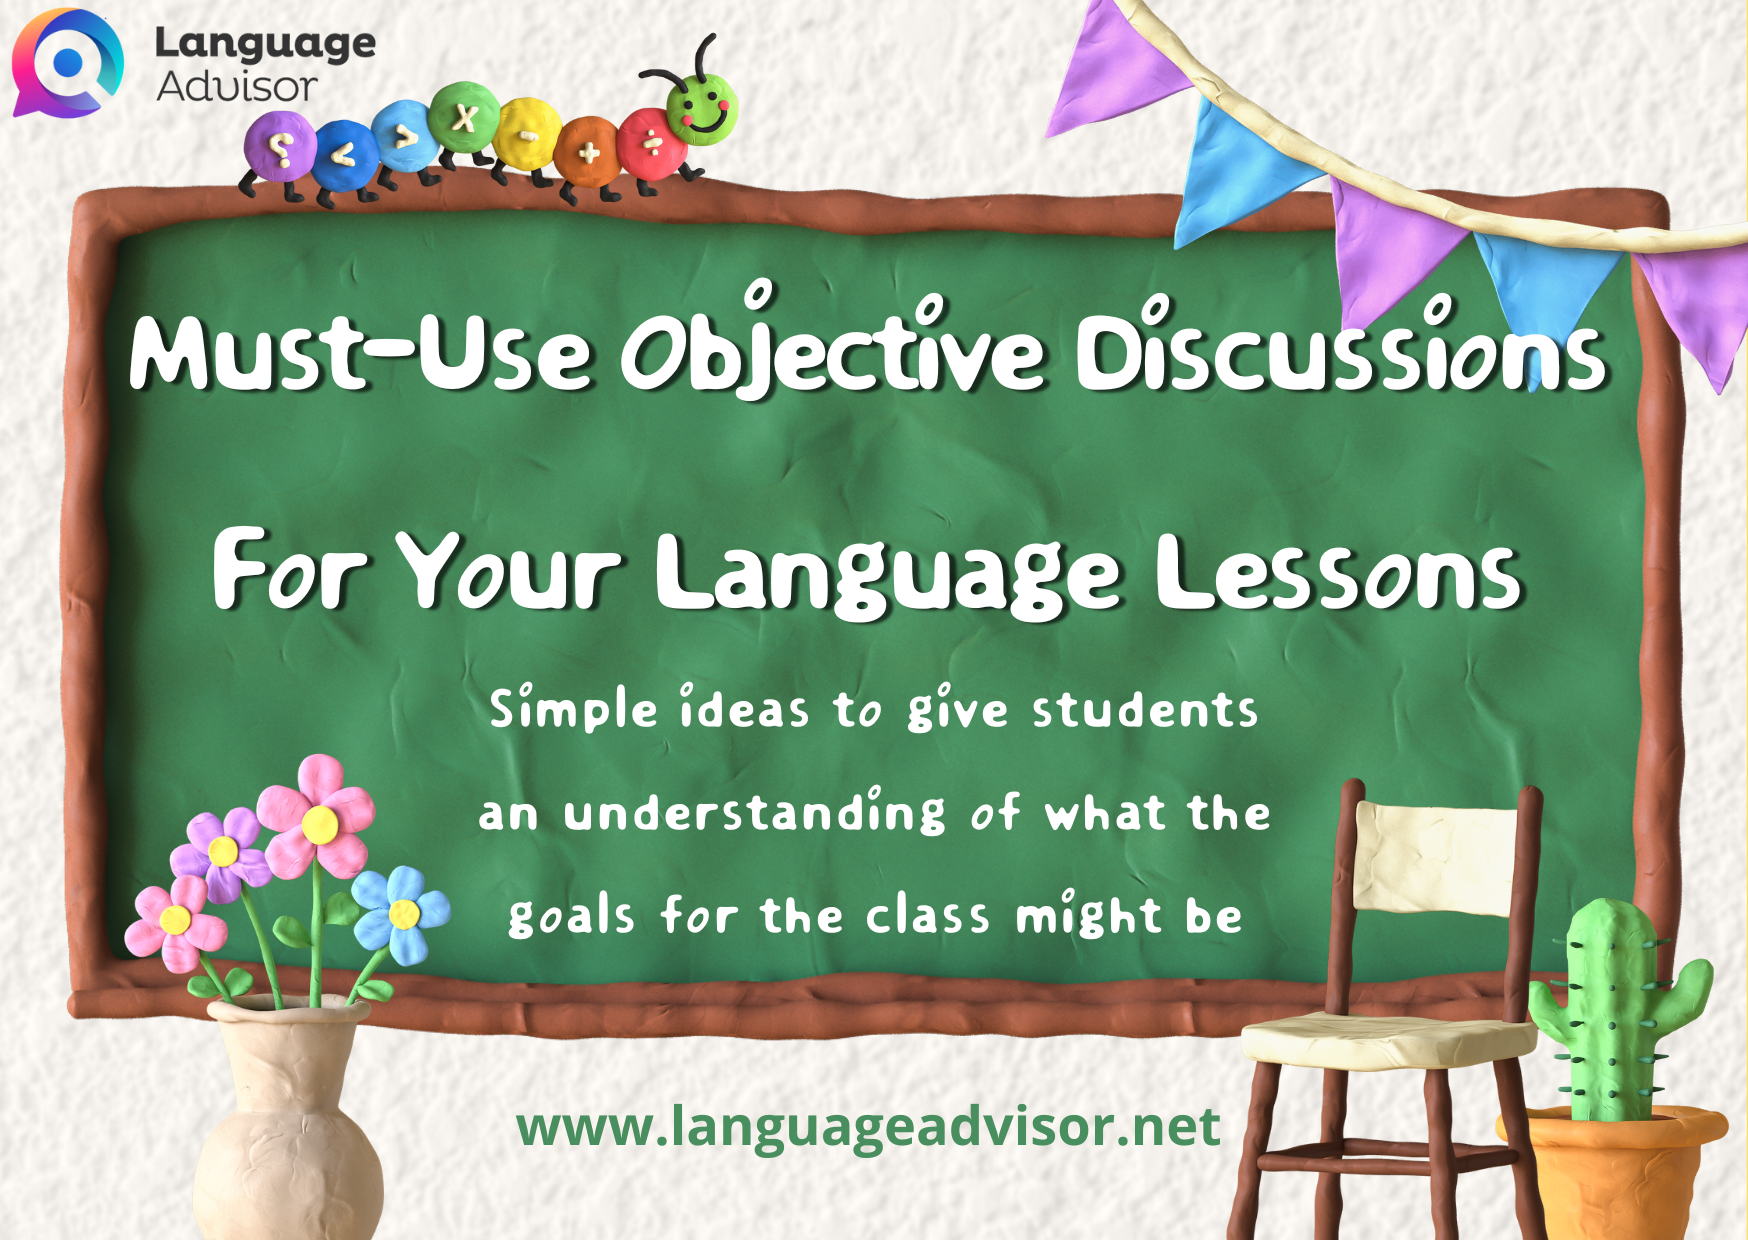 Must-Use Objective Discussions For Your Language Lessons